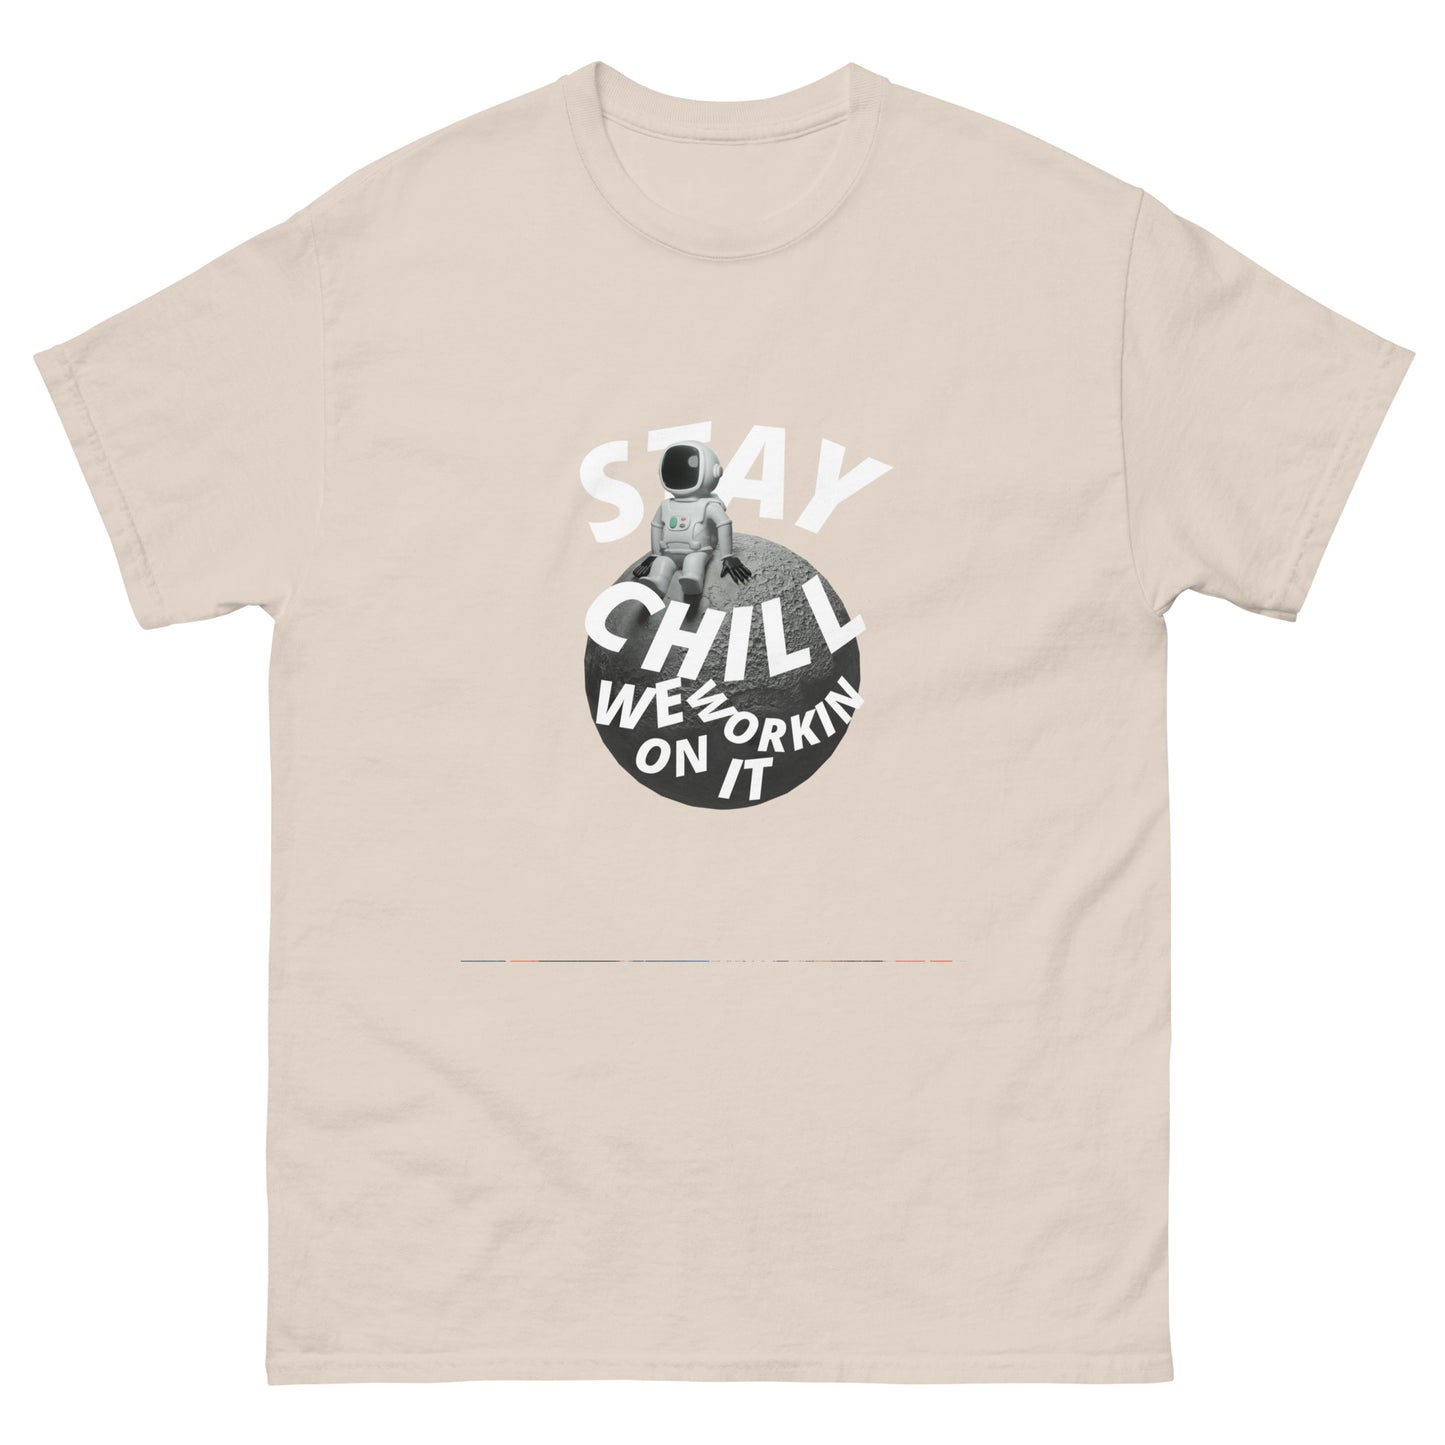 Stay Chill classic tee